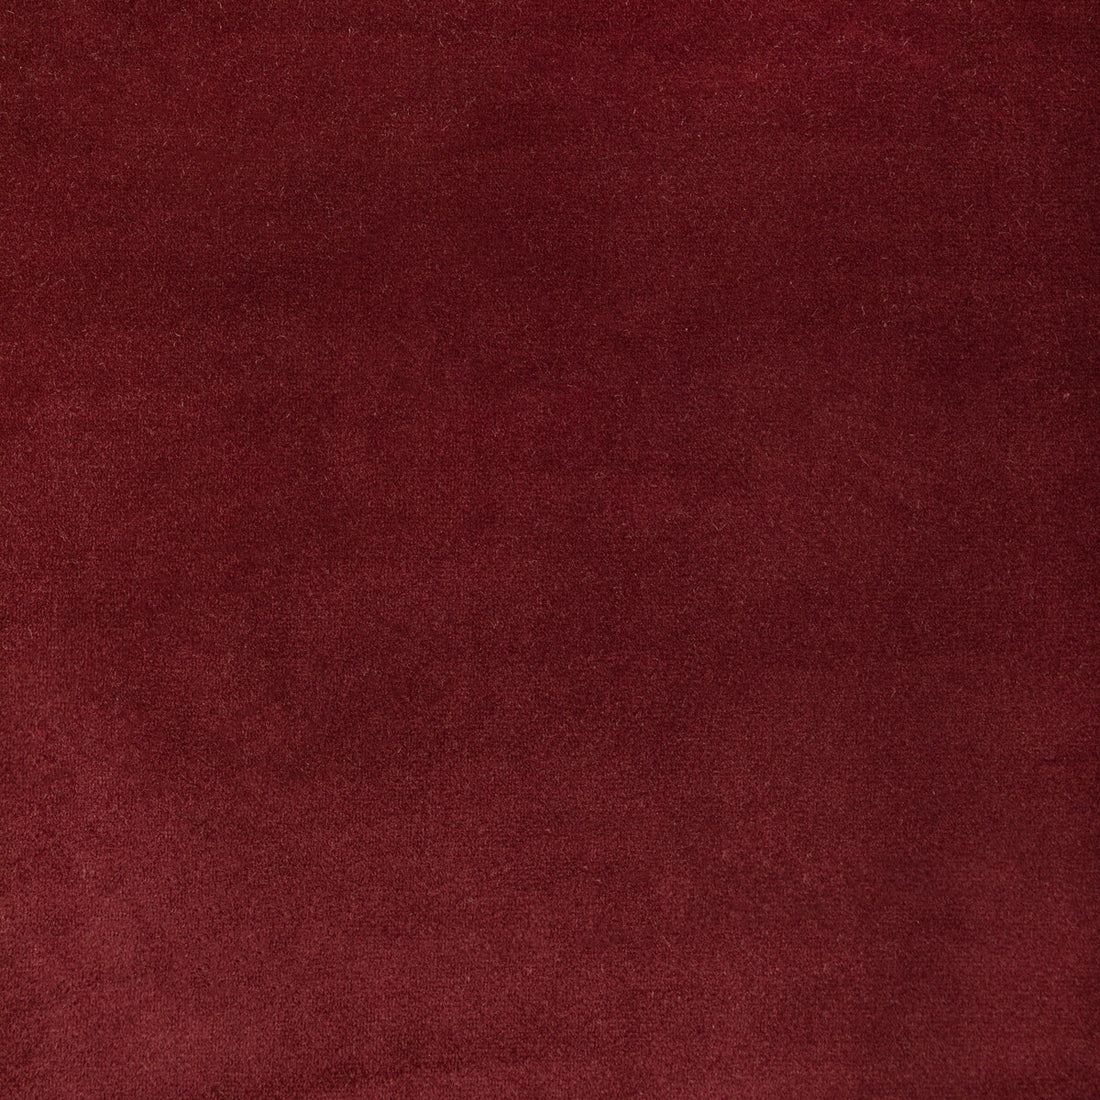 Rocco Velvet fabric in currant color - pattern 36652.912.0 - by Kravet Contract